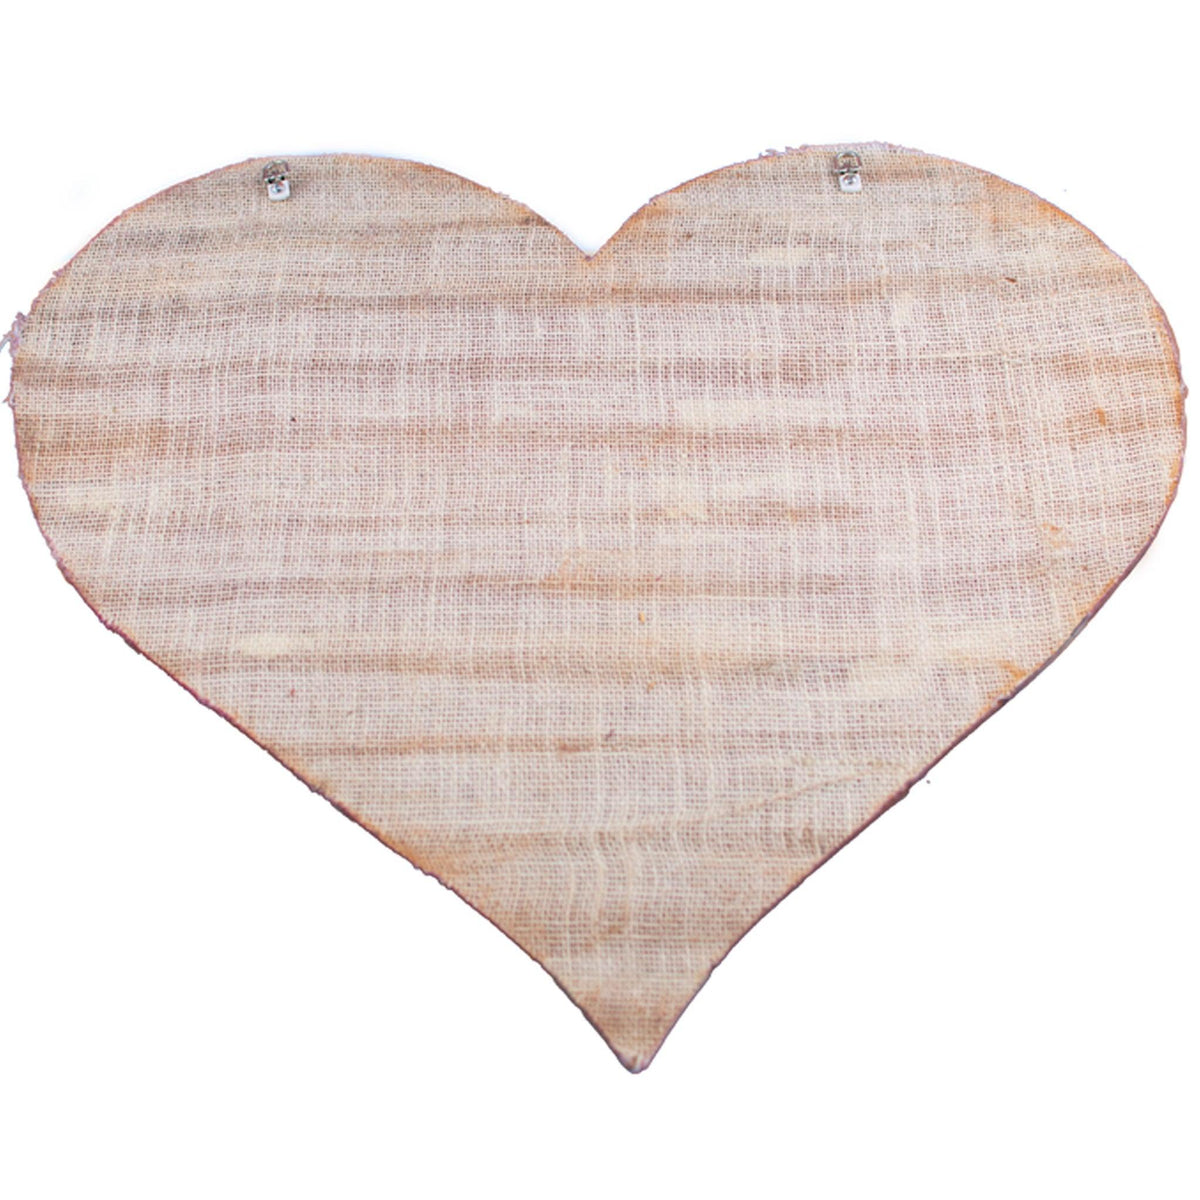 Lee Display's hearts come with a burlap backing so the wood flaps can fold